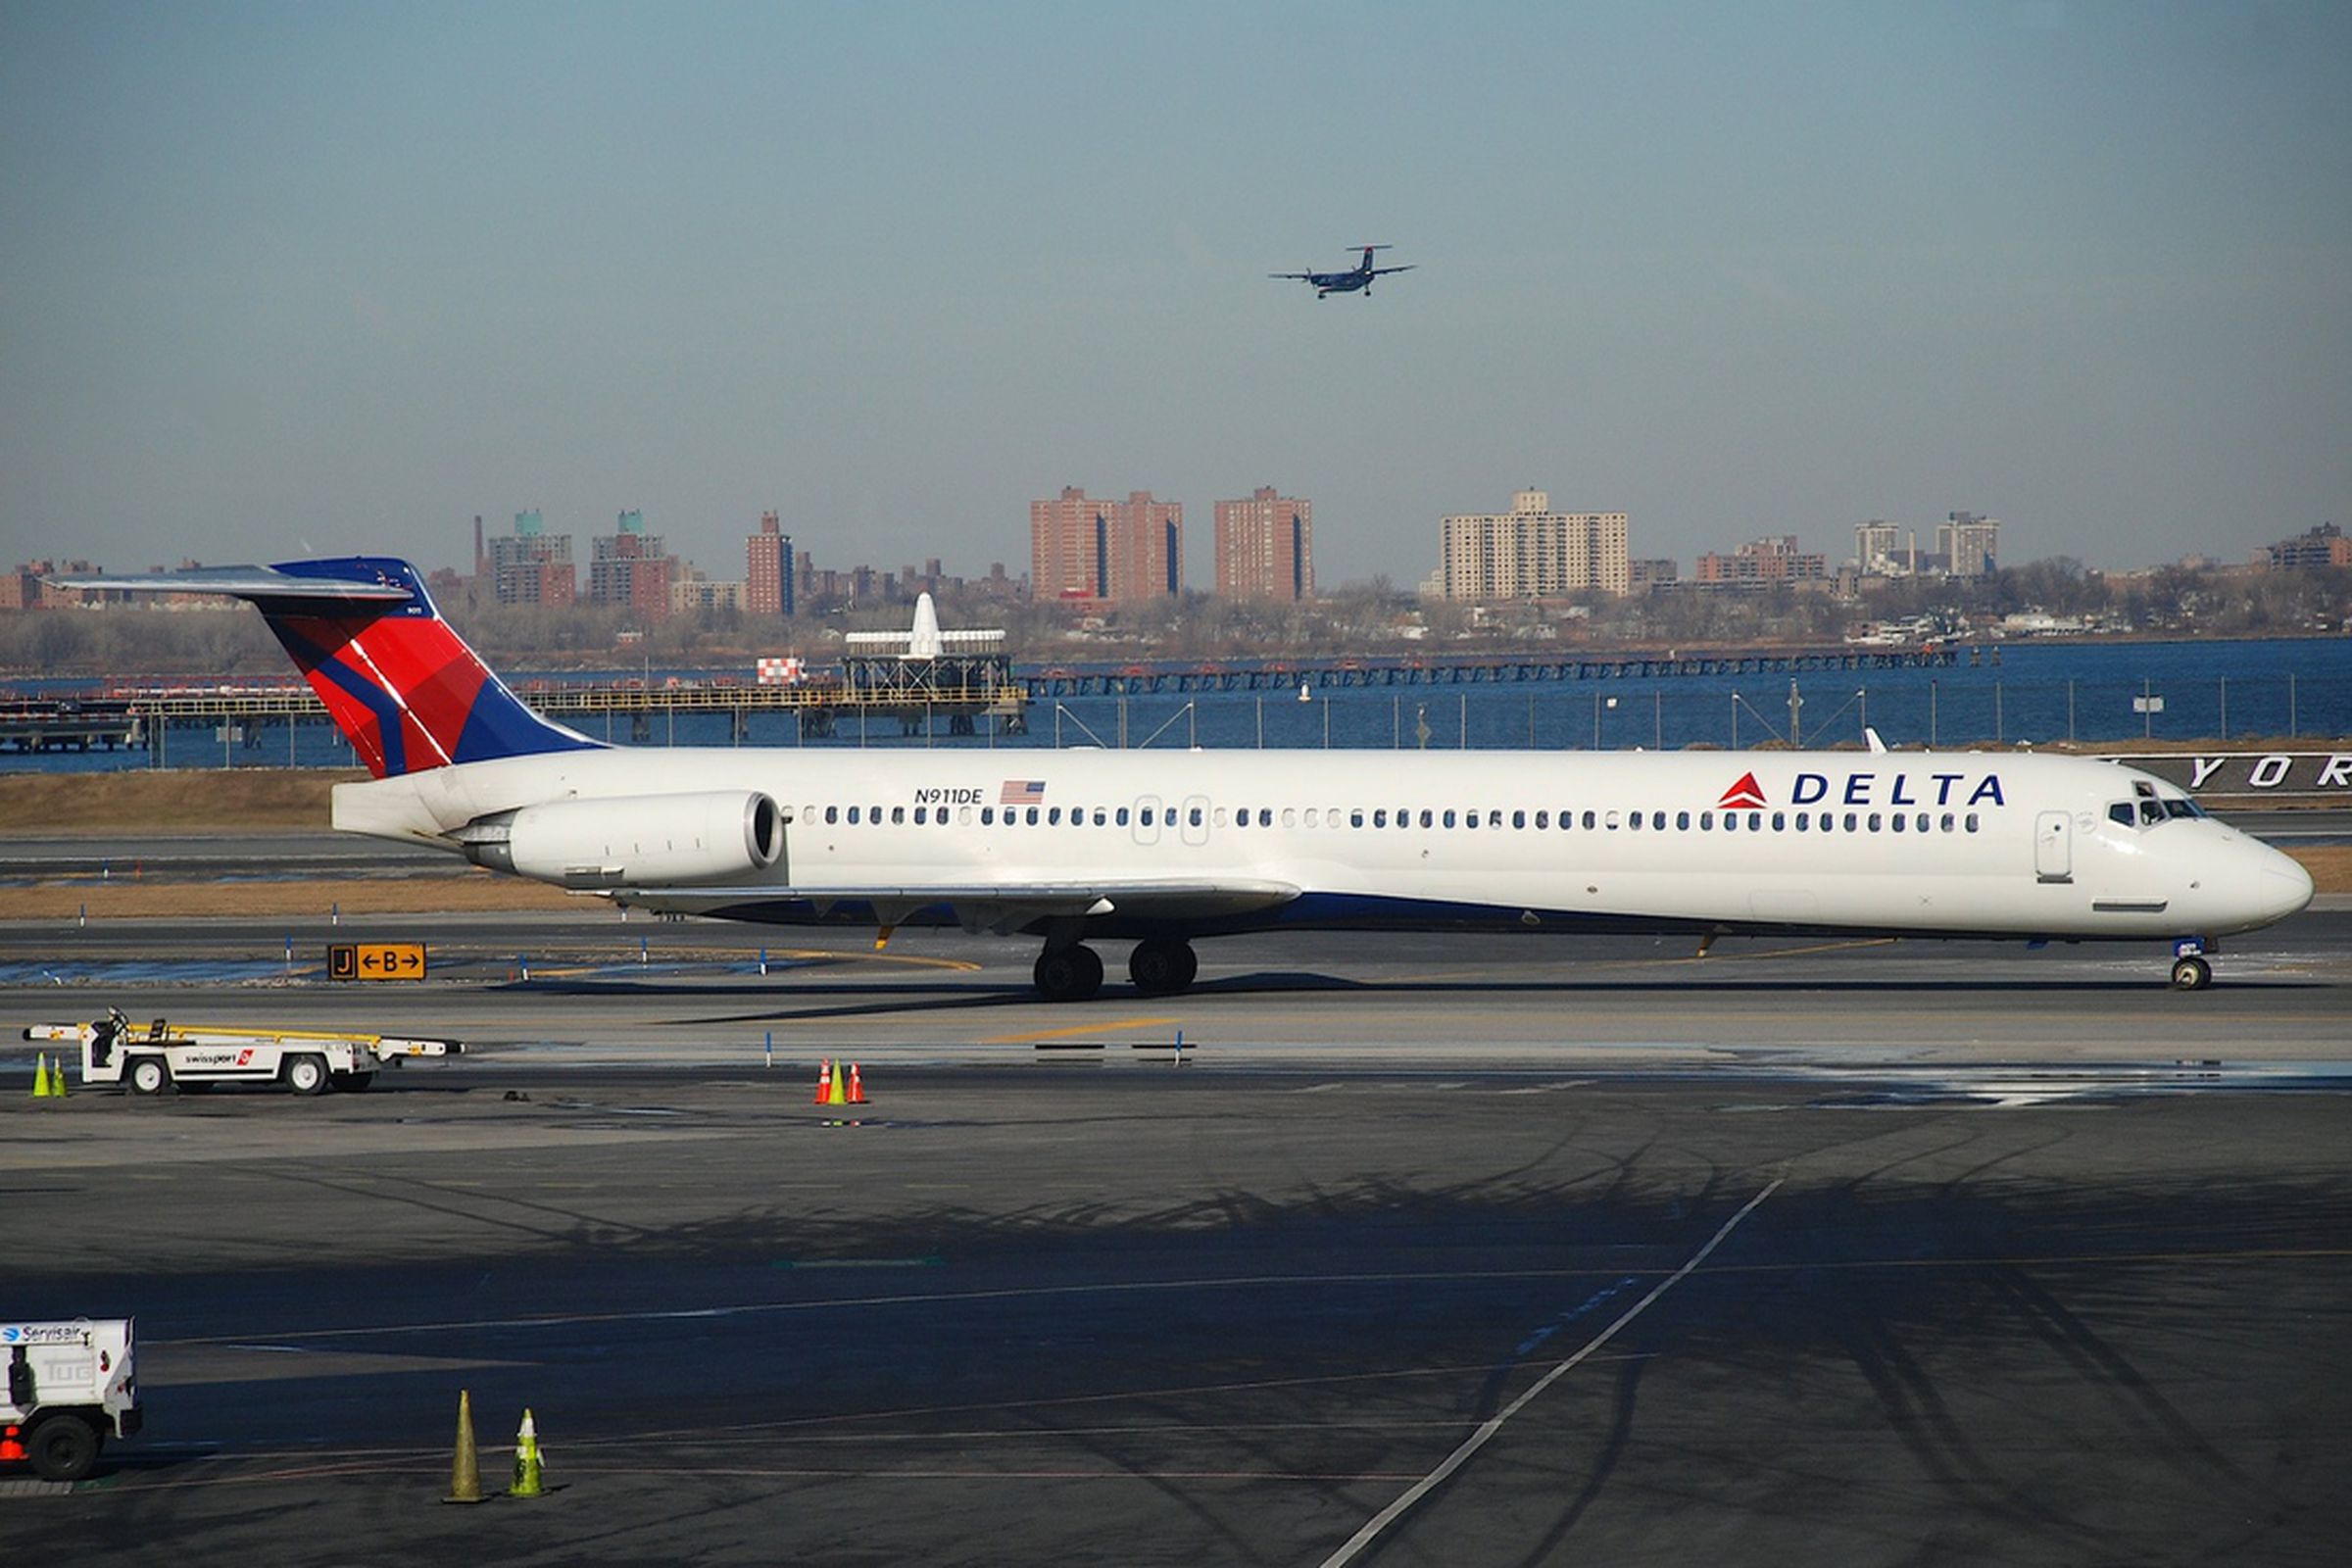 Delta Air Lines plane (Wikimedia Commons)